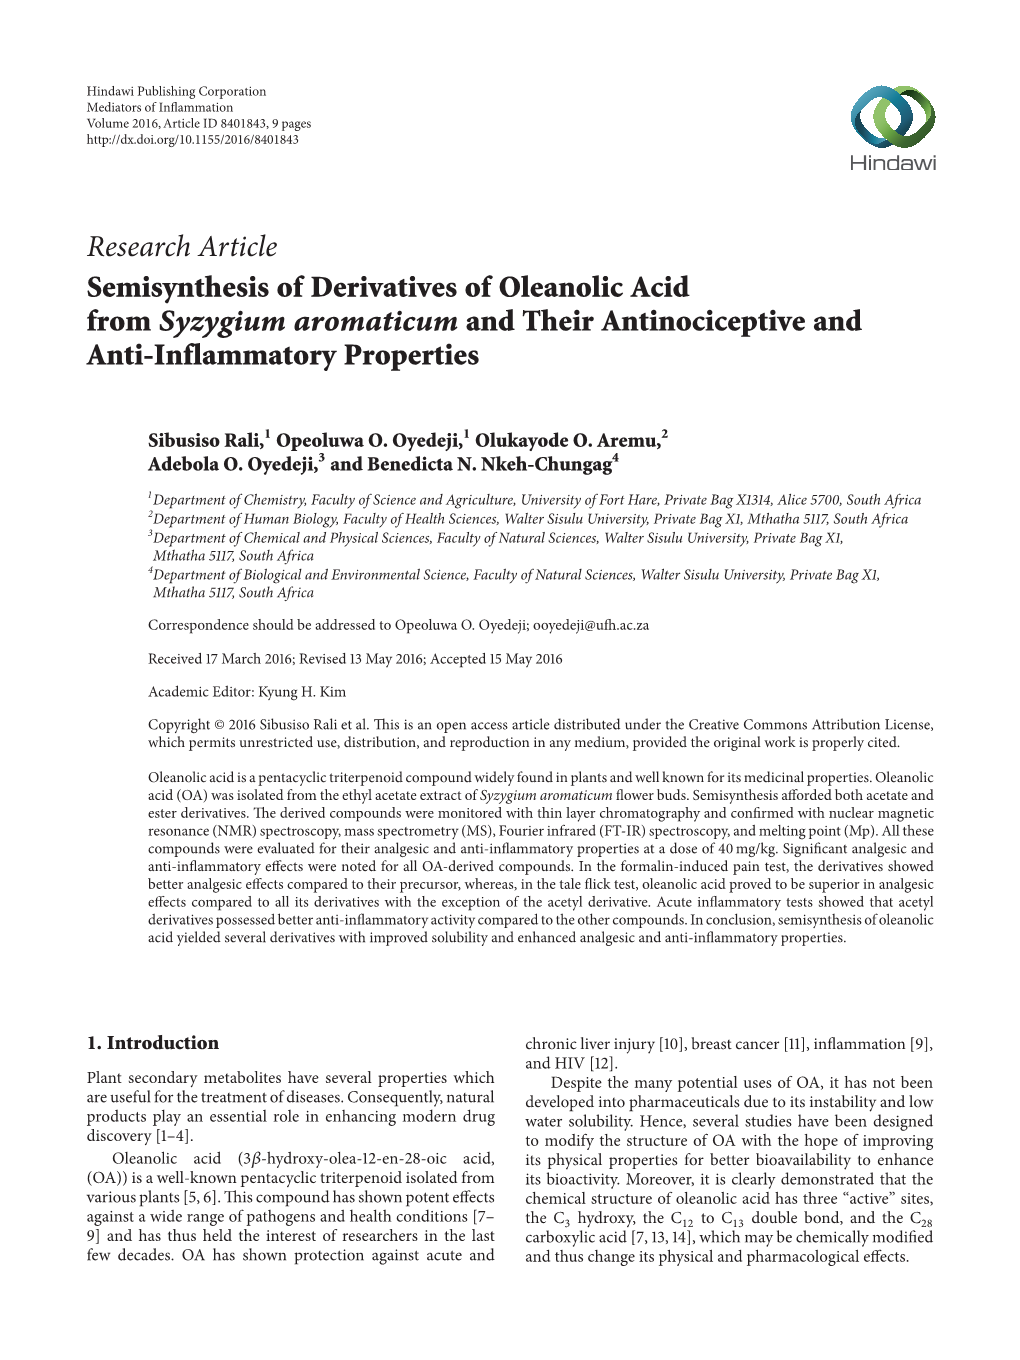 Semisynthesis of Derivatives of Oleanolic Acid from Syzygium Aromaticum and Their Antinociceptive and Anti-Inflammatory Properties